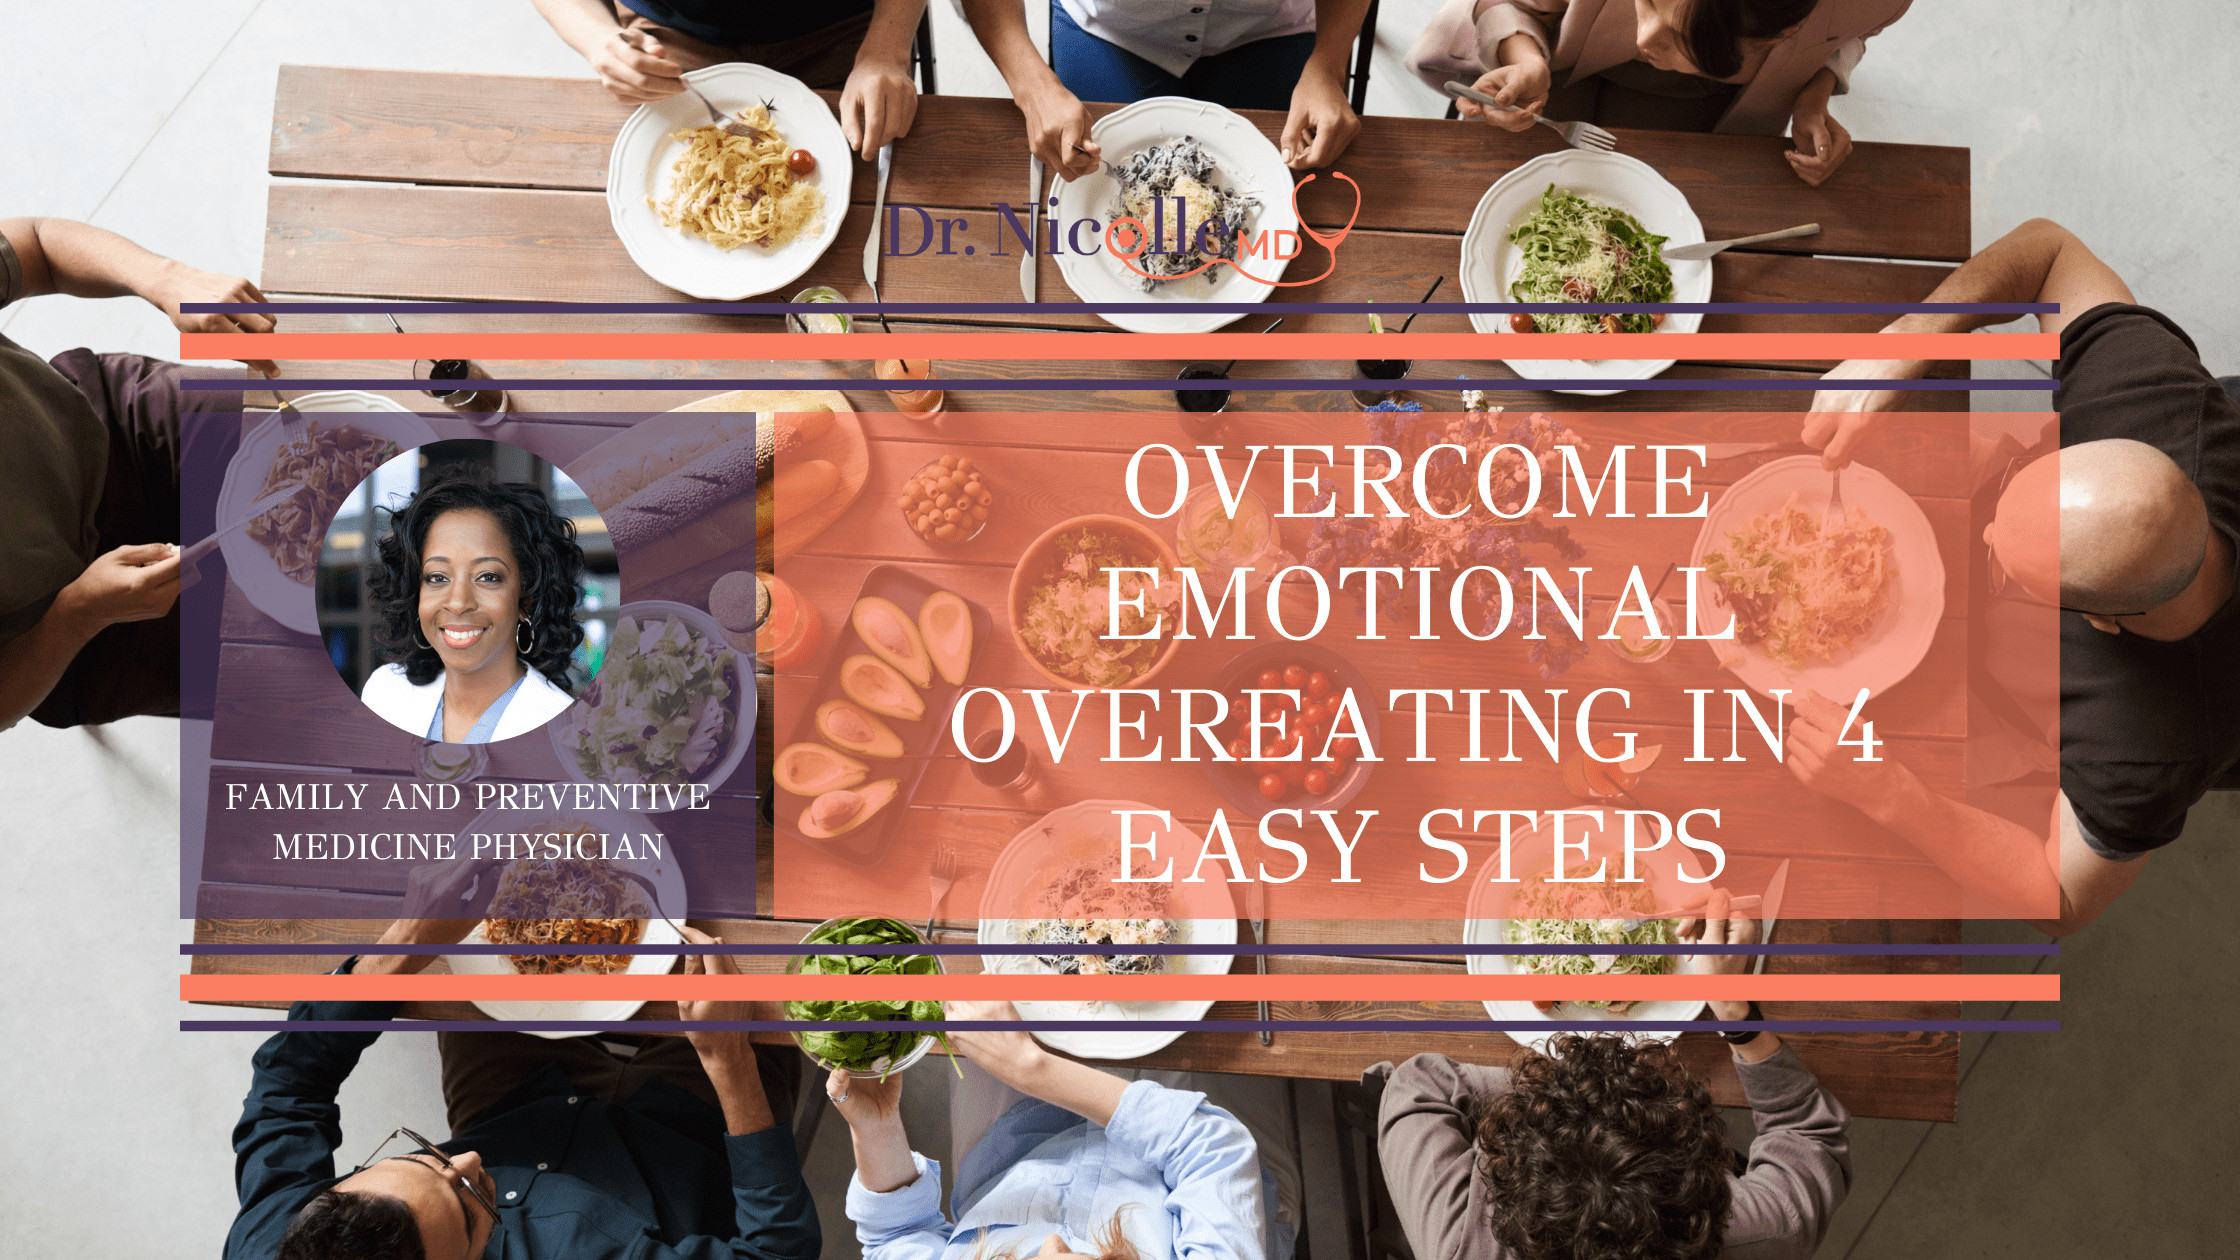 11Overcome Emotional Overeating in 4 Easy Steps